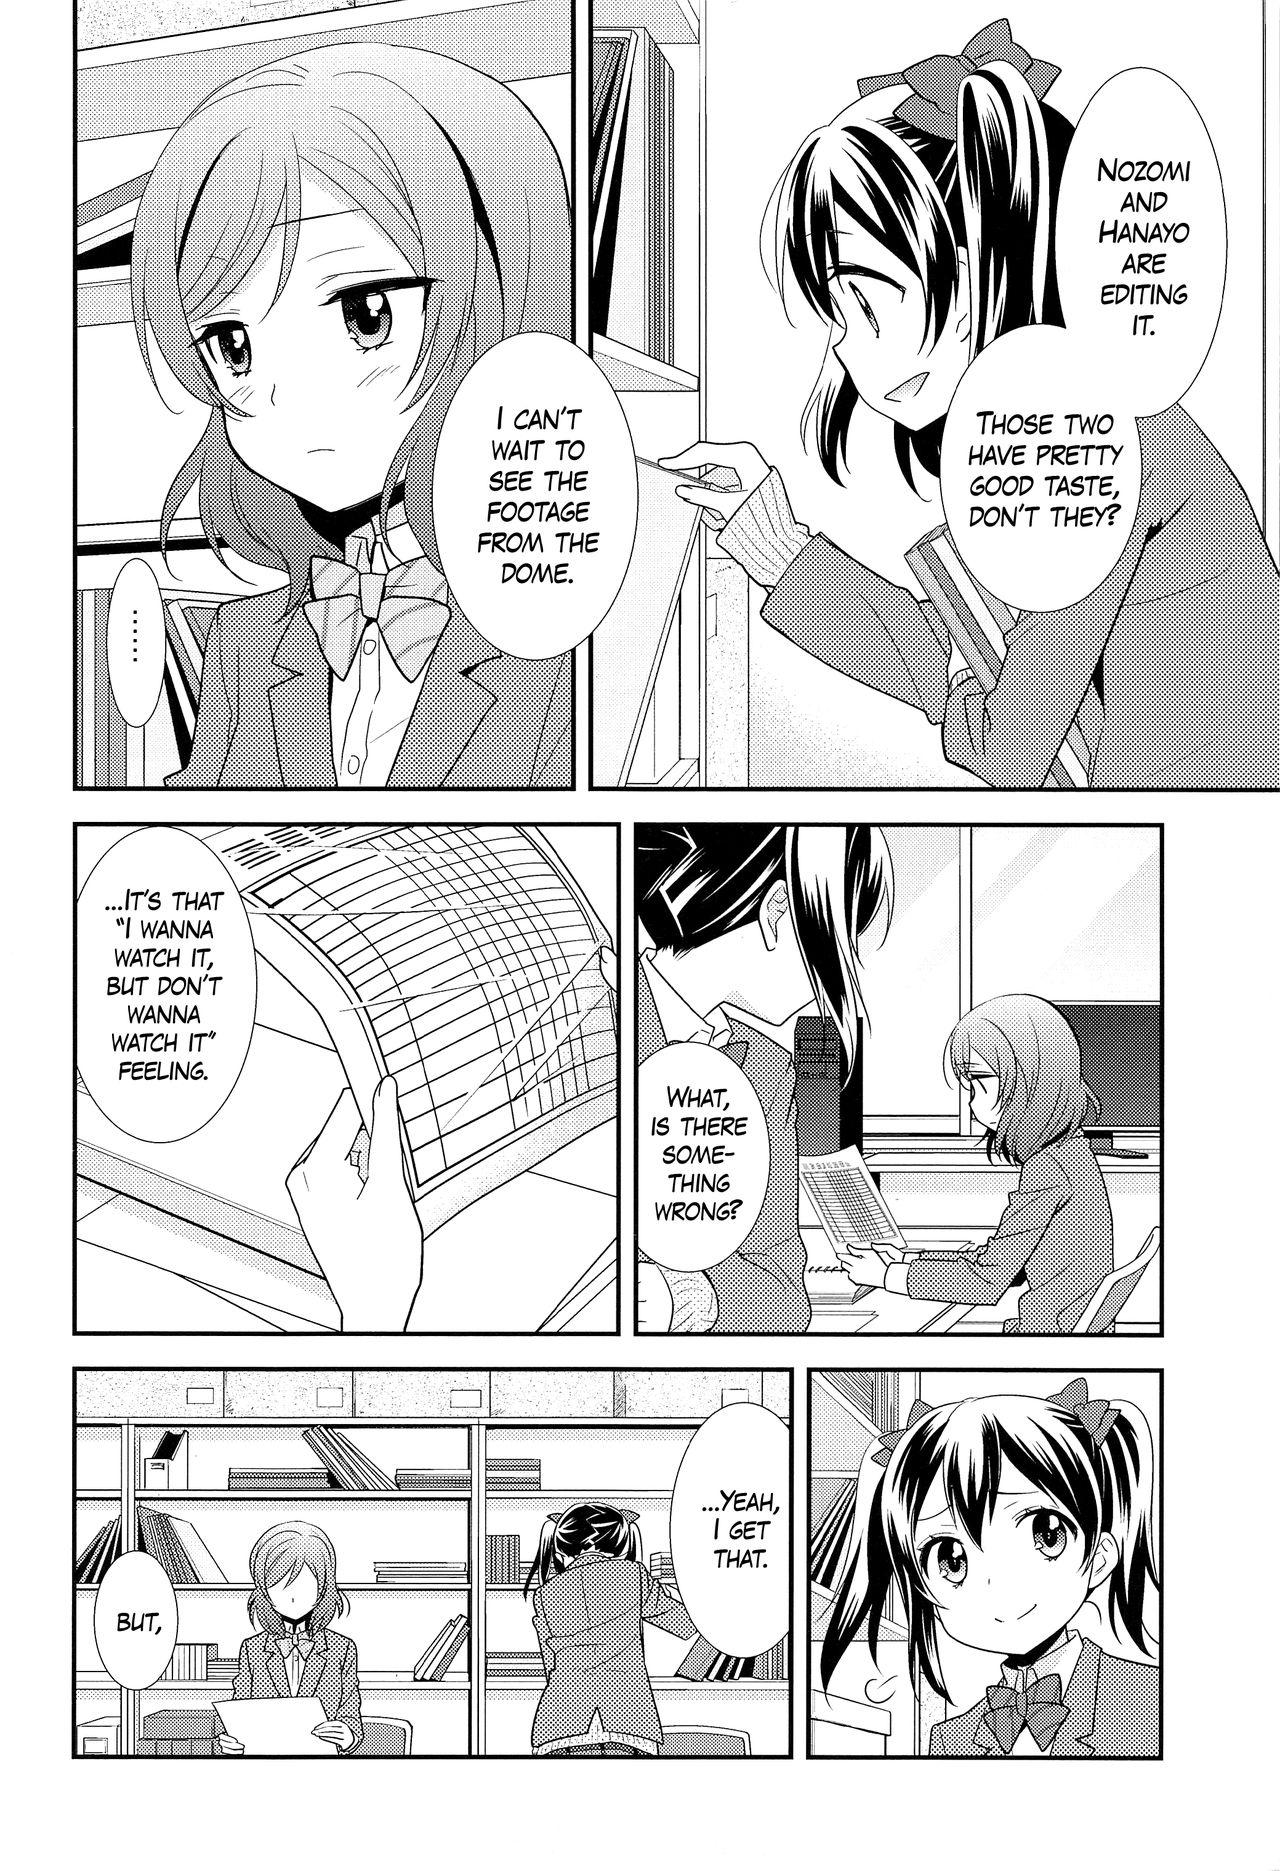 Cuck Bokura no Te ni wa Ai Shika nai. | There’s Nothing but Love In Our Hands. - Love live Ass Fucked - Page 8